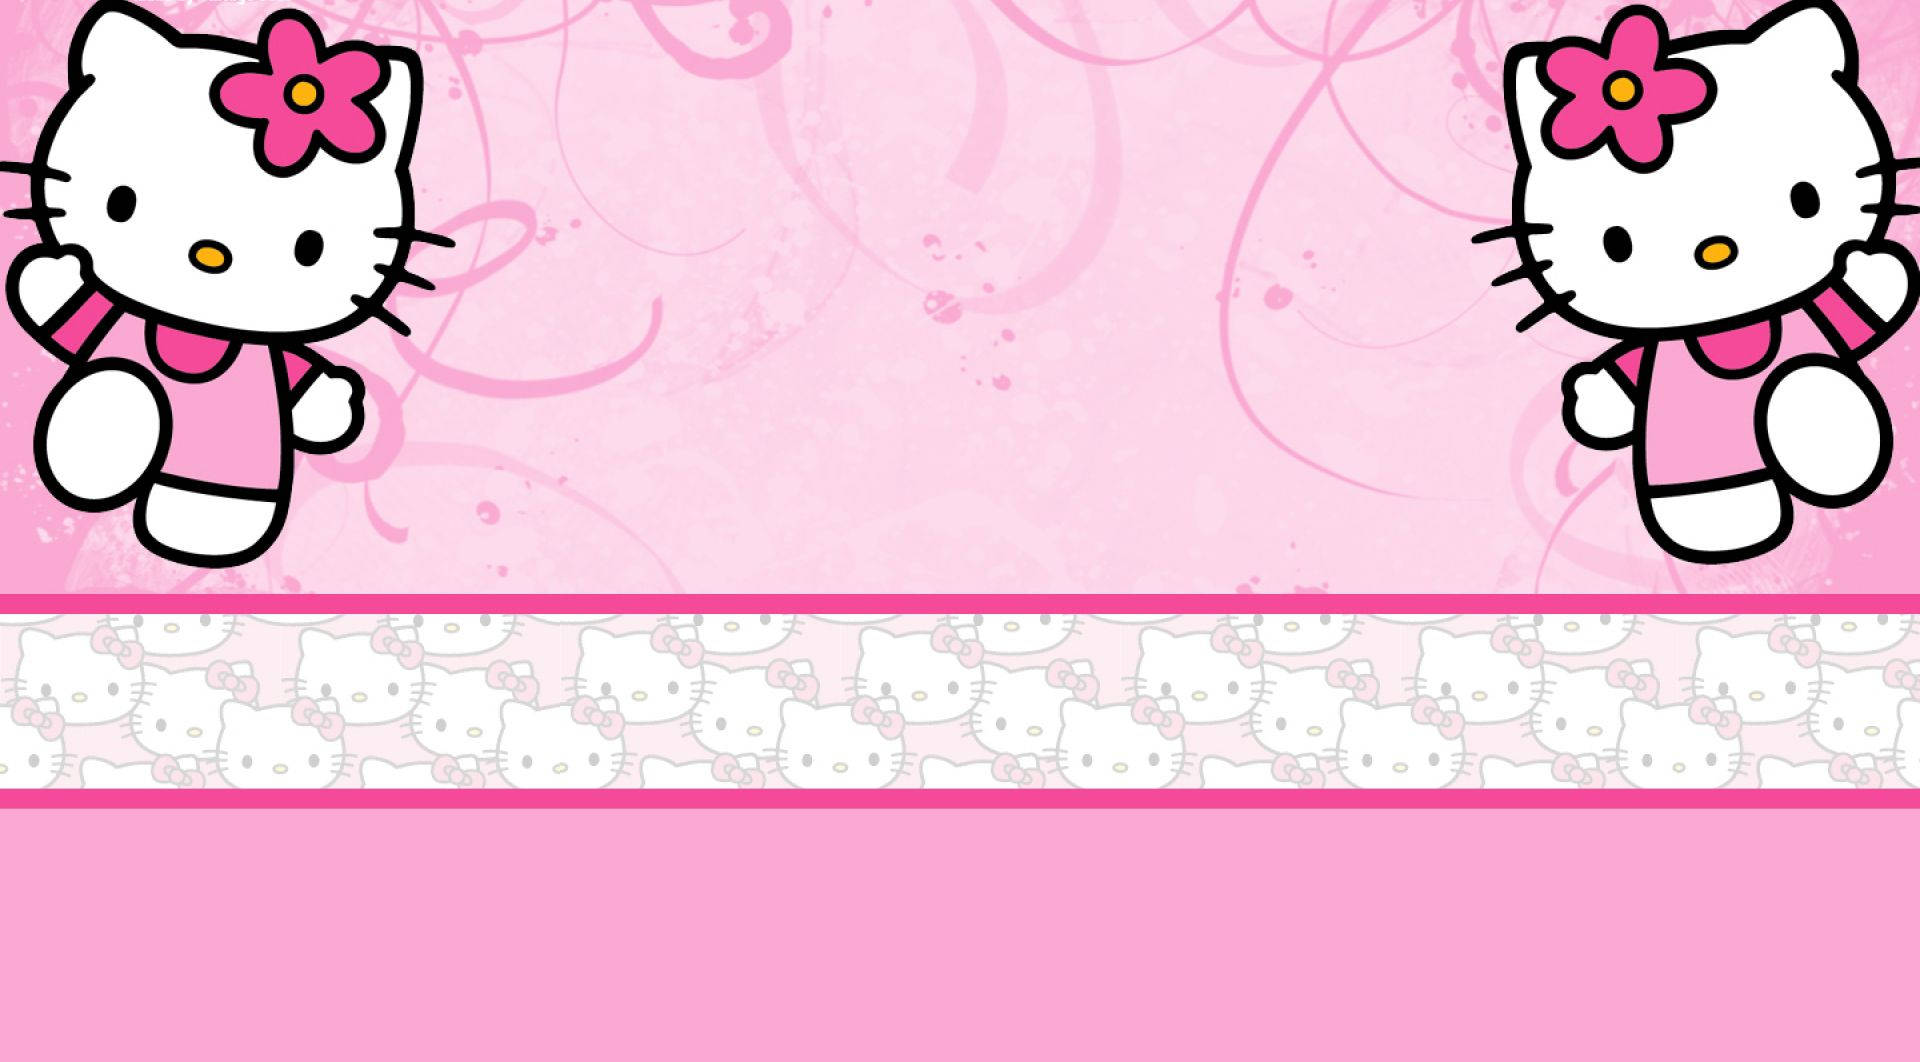 Two Delightful Hello Kitty Characters in Pretty Pink Background Wallpaper